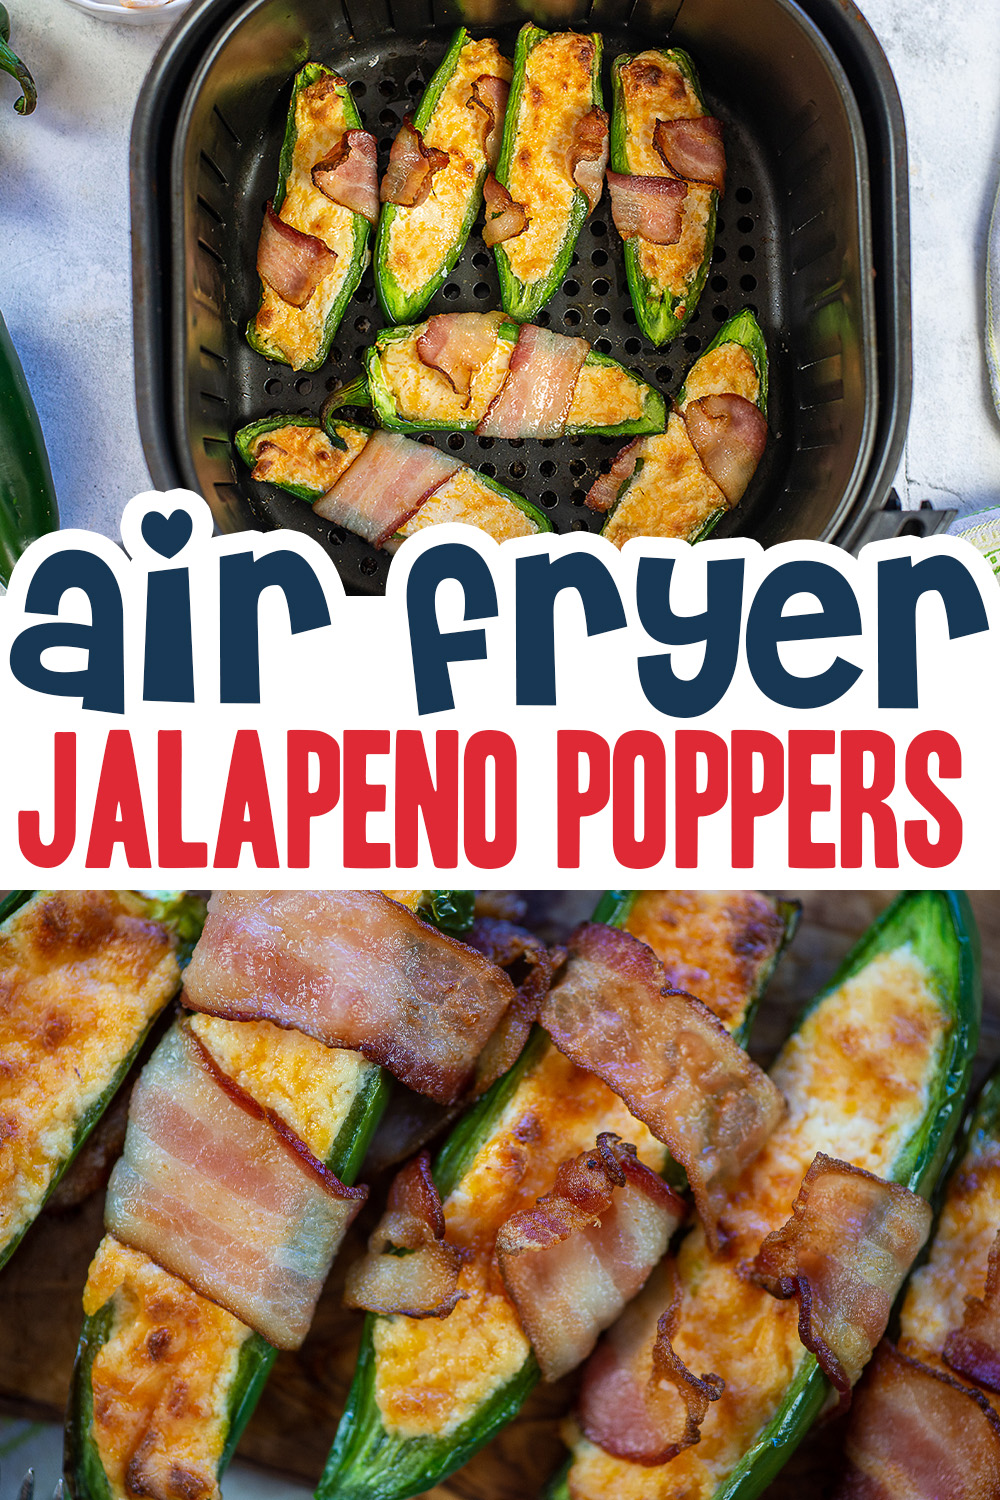 These poppers are full of flavor without just the right amount of spice!  They are perfect for a large gathering where you will serve appetizers!